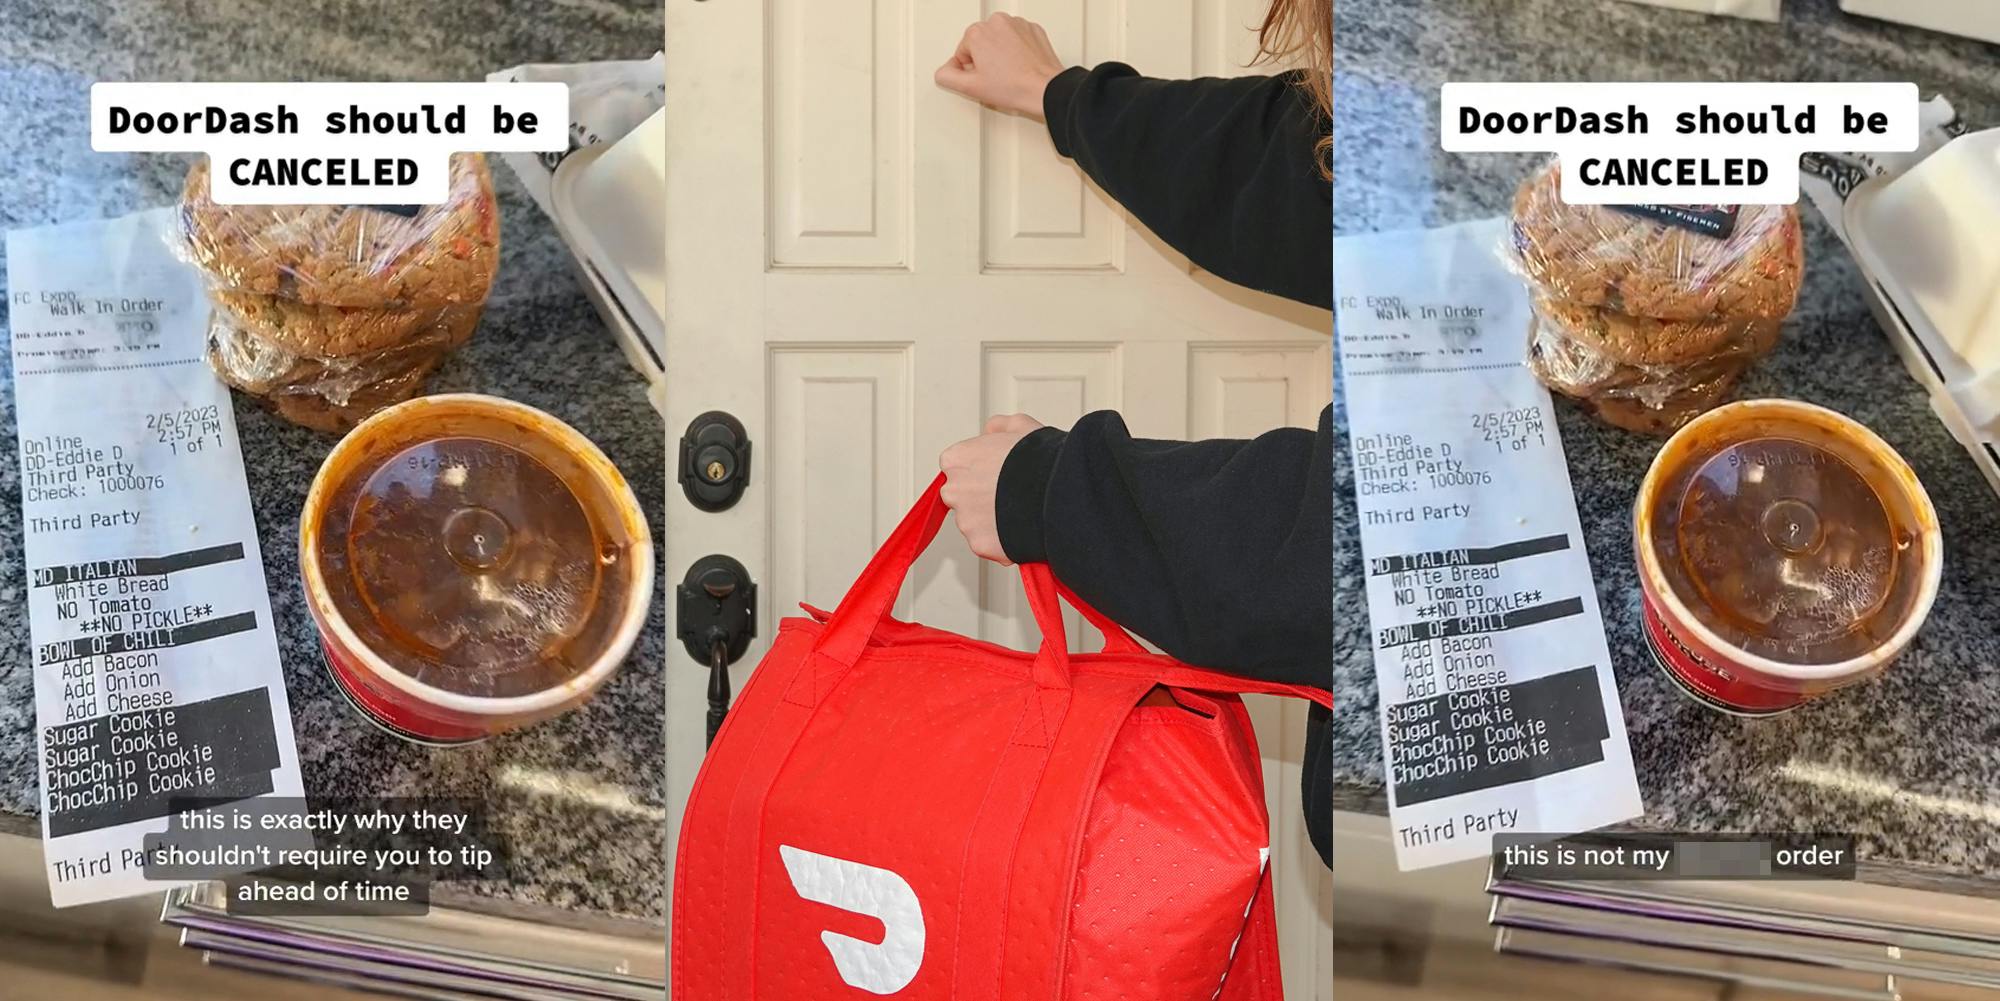 DoorDash order on counter with caption "DoorDash should be CANCELED" "this is exactly why they shouldn't require you to tip ahead of time" (l) DoorDash delivery at door as worker knocks (c) DoorDash order on counter with caption "DoorDash should be CANCELED" "this is not my blank order" (r)